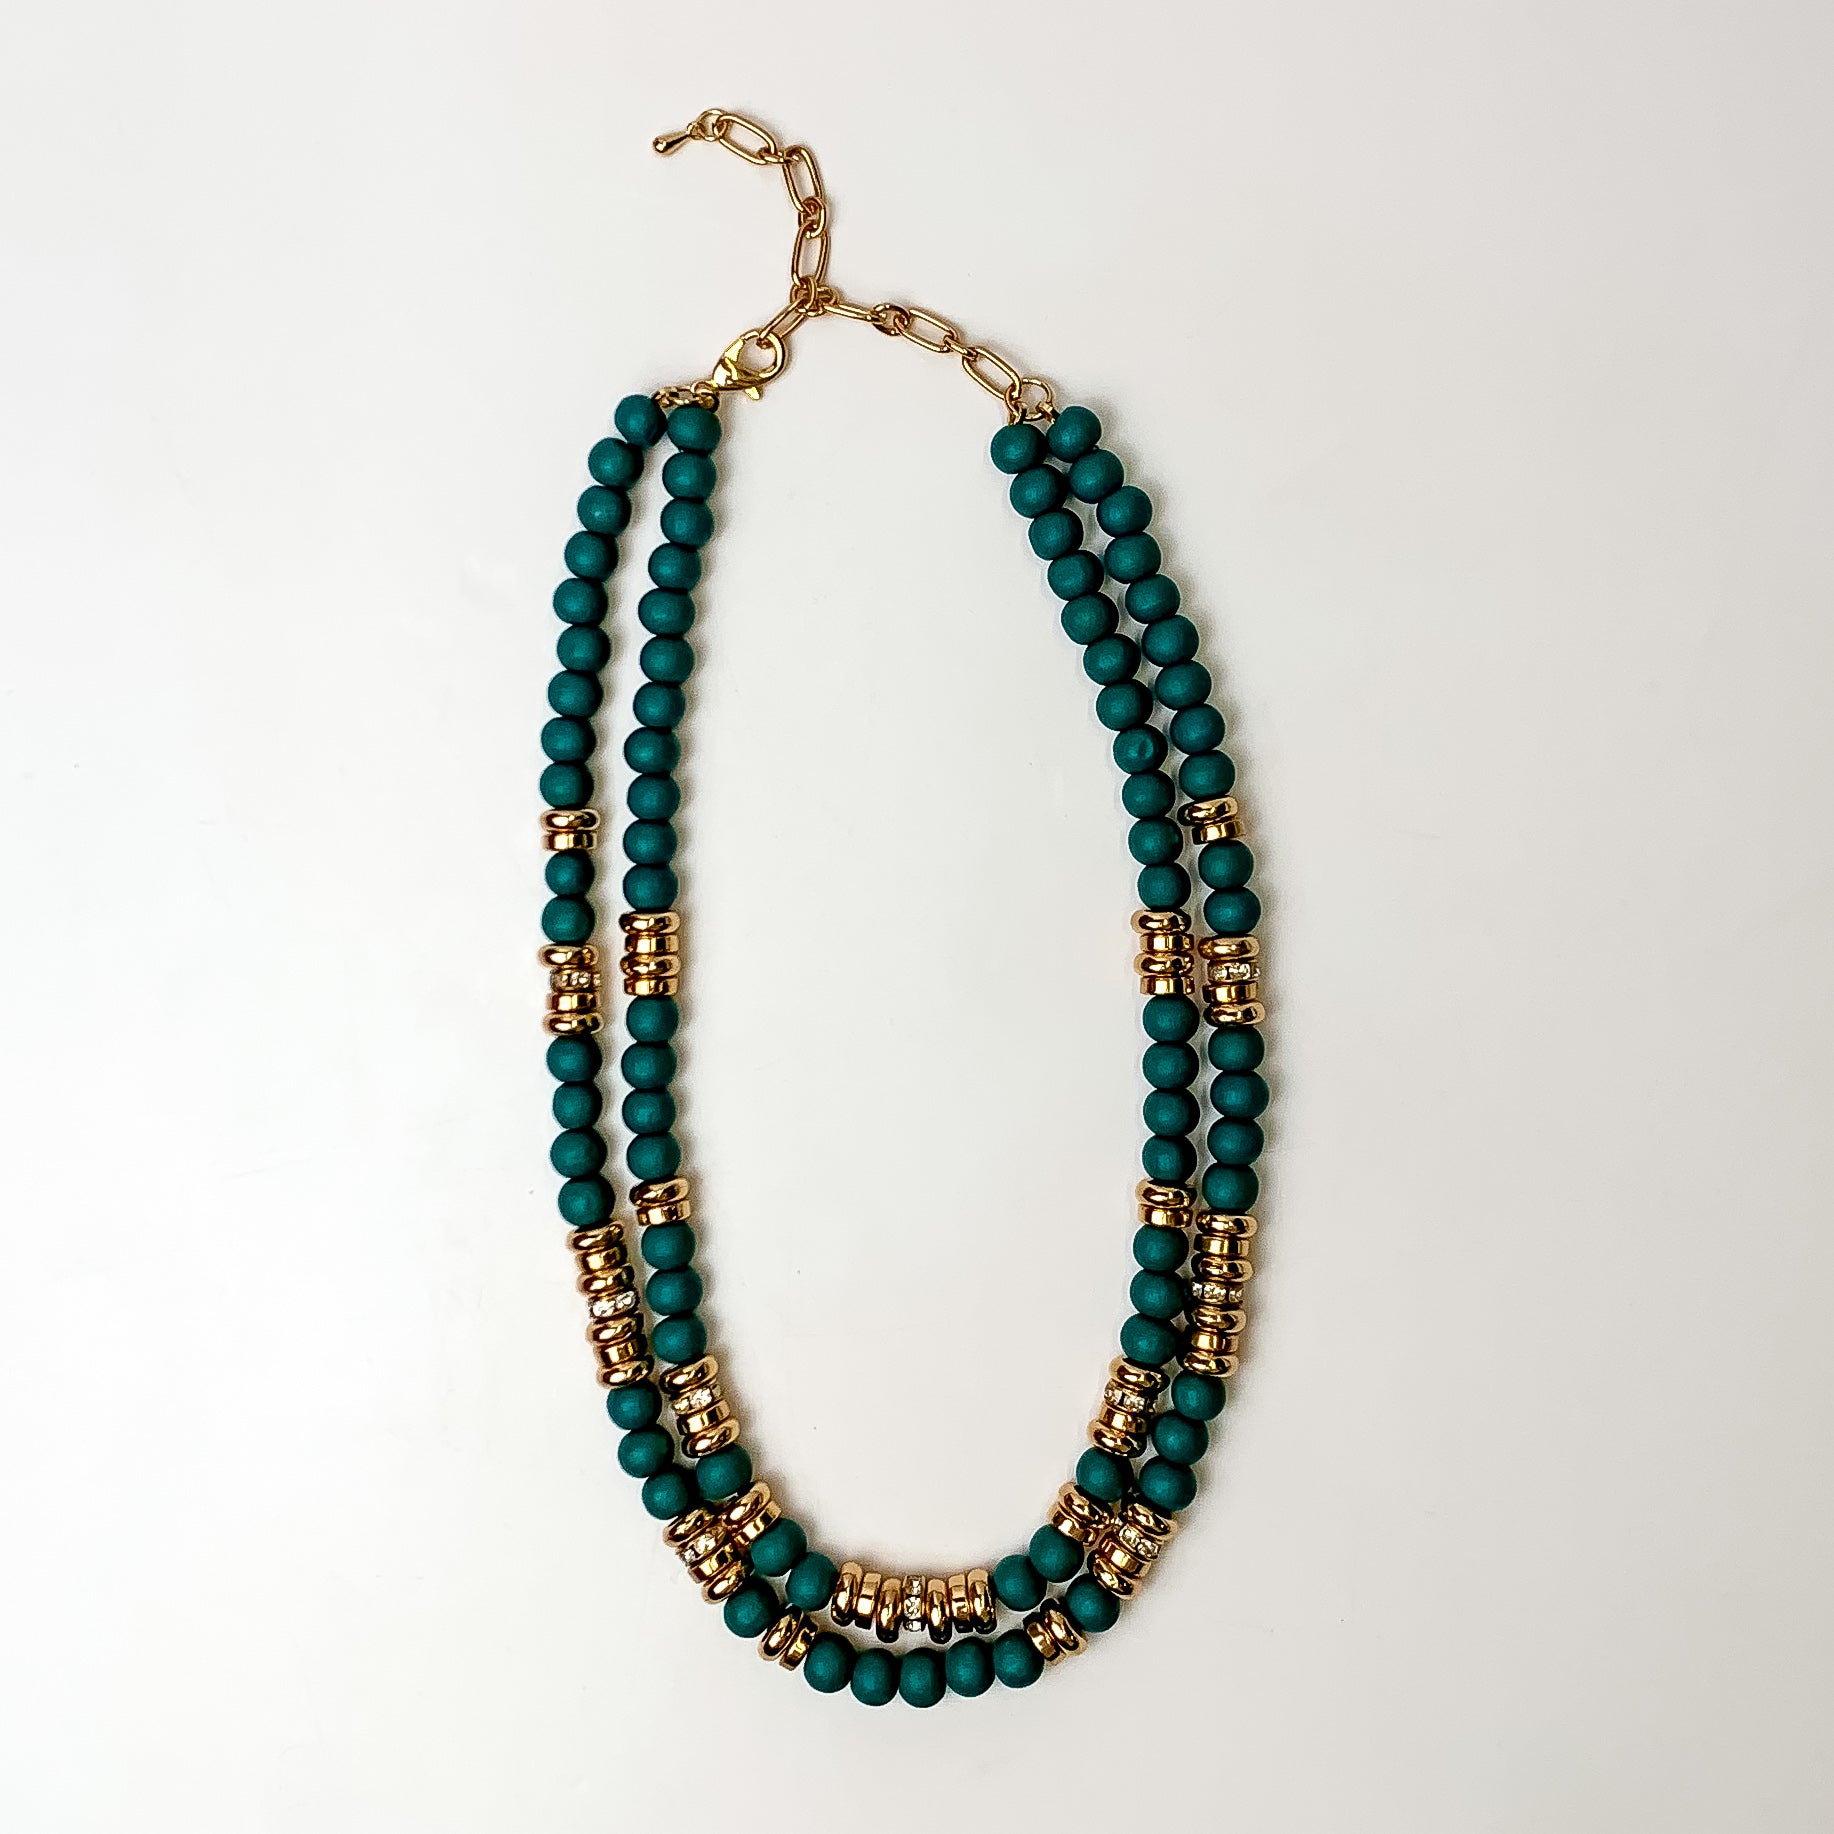 This layered necklace in deep blue has gold spacers. It is taken with a white background.